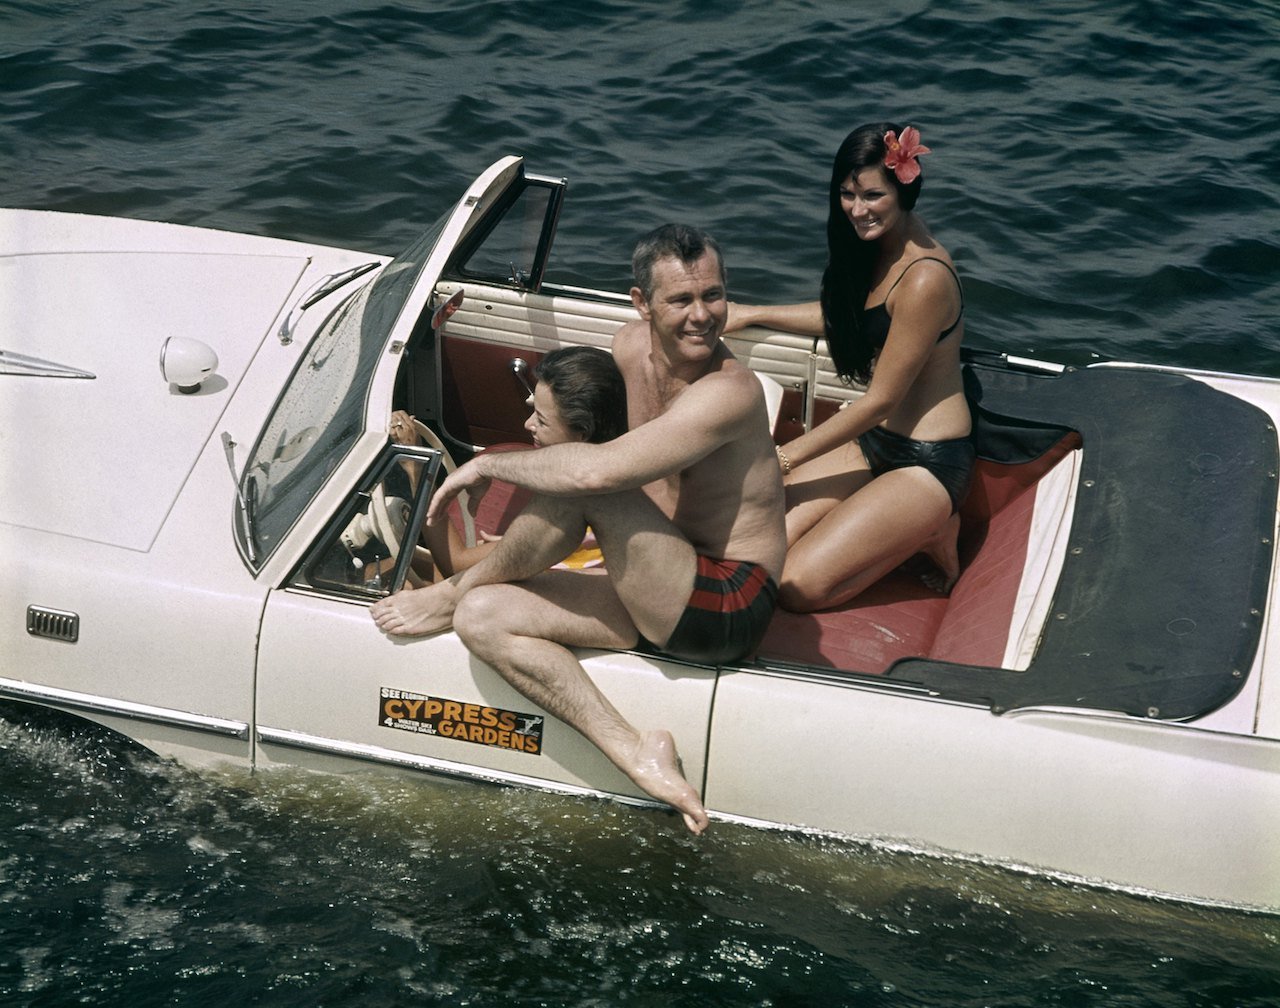 Johnny Carson sits in a car in the water with bikini-clad water skiers